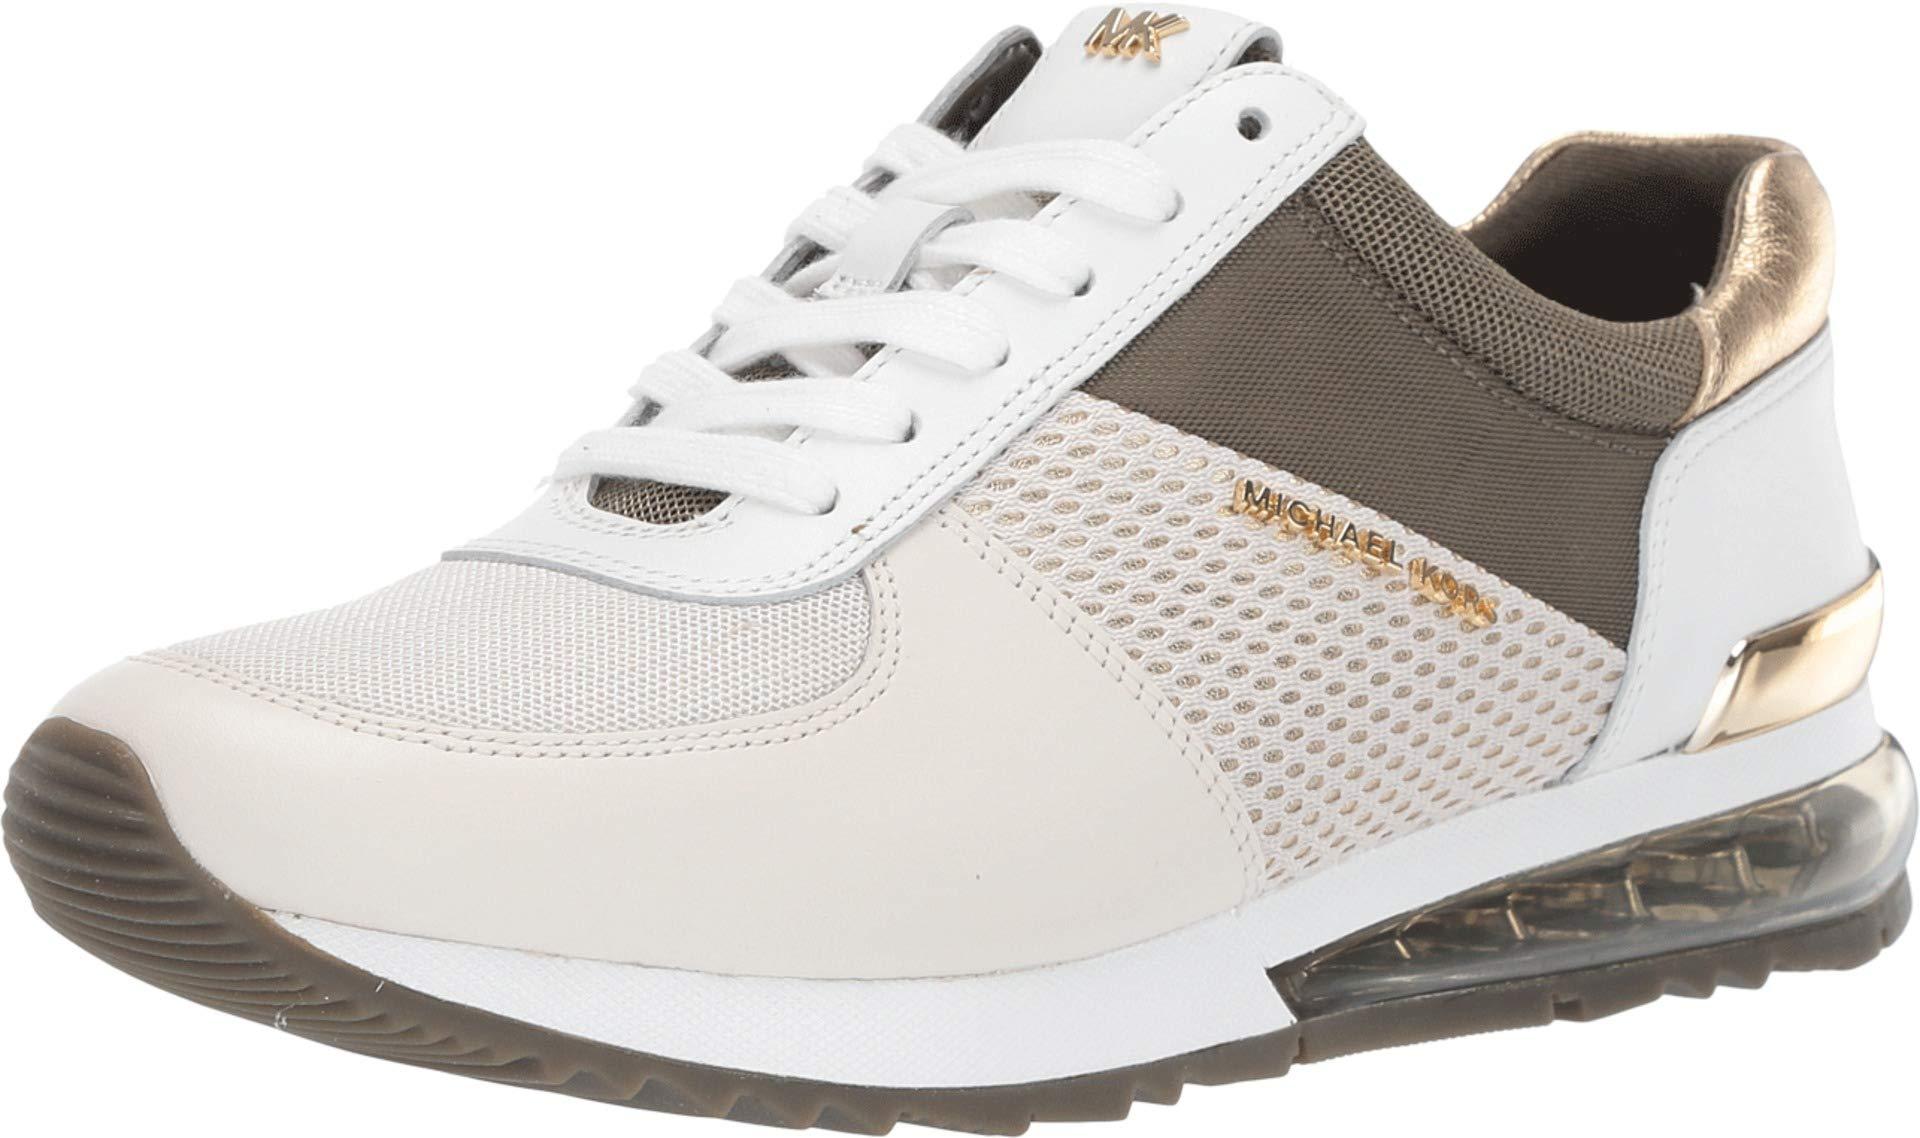 Michael Kors Allie Extreme Mixed-media Trainer in Gold (Metallic 